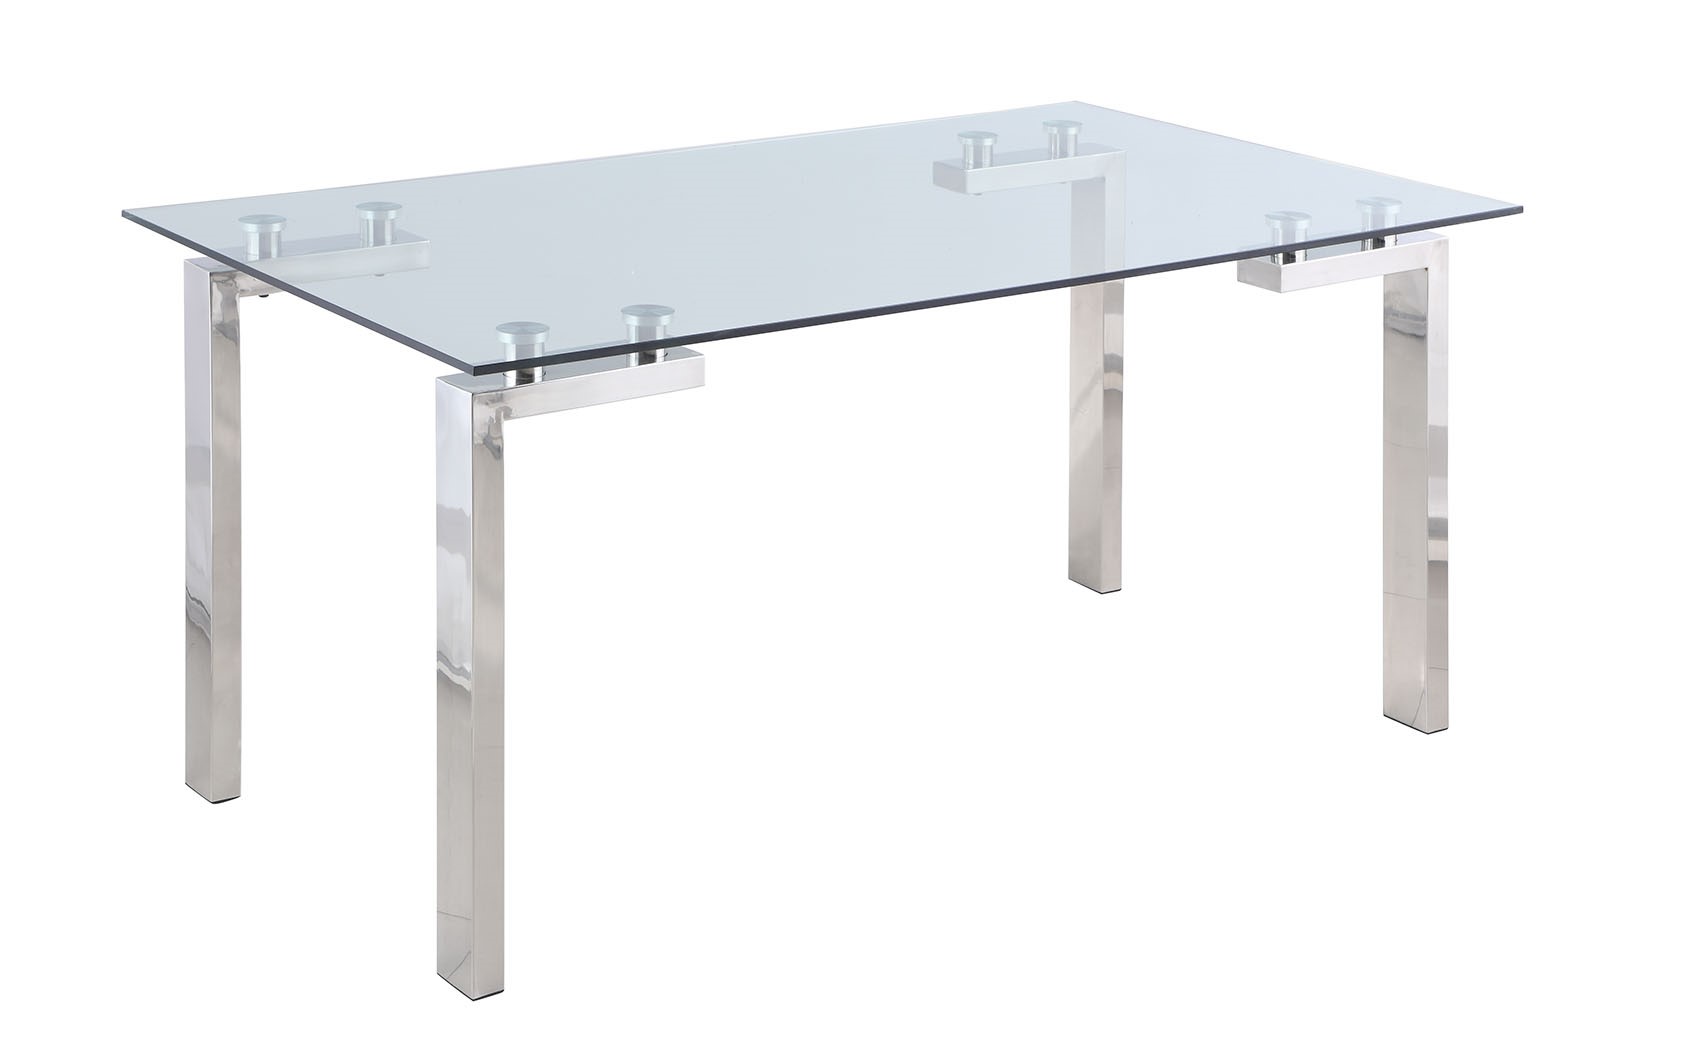 Yasmin Glass Dining Table by Chintaly